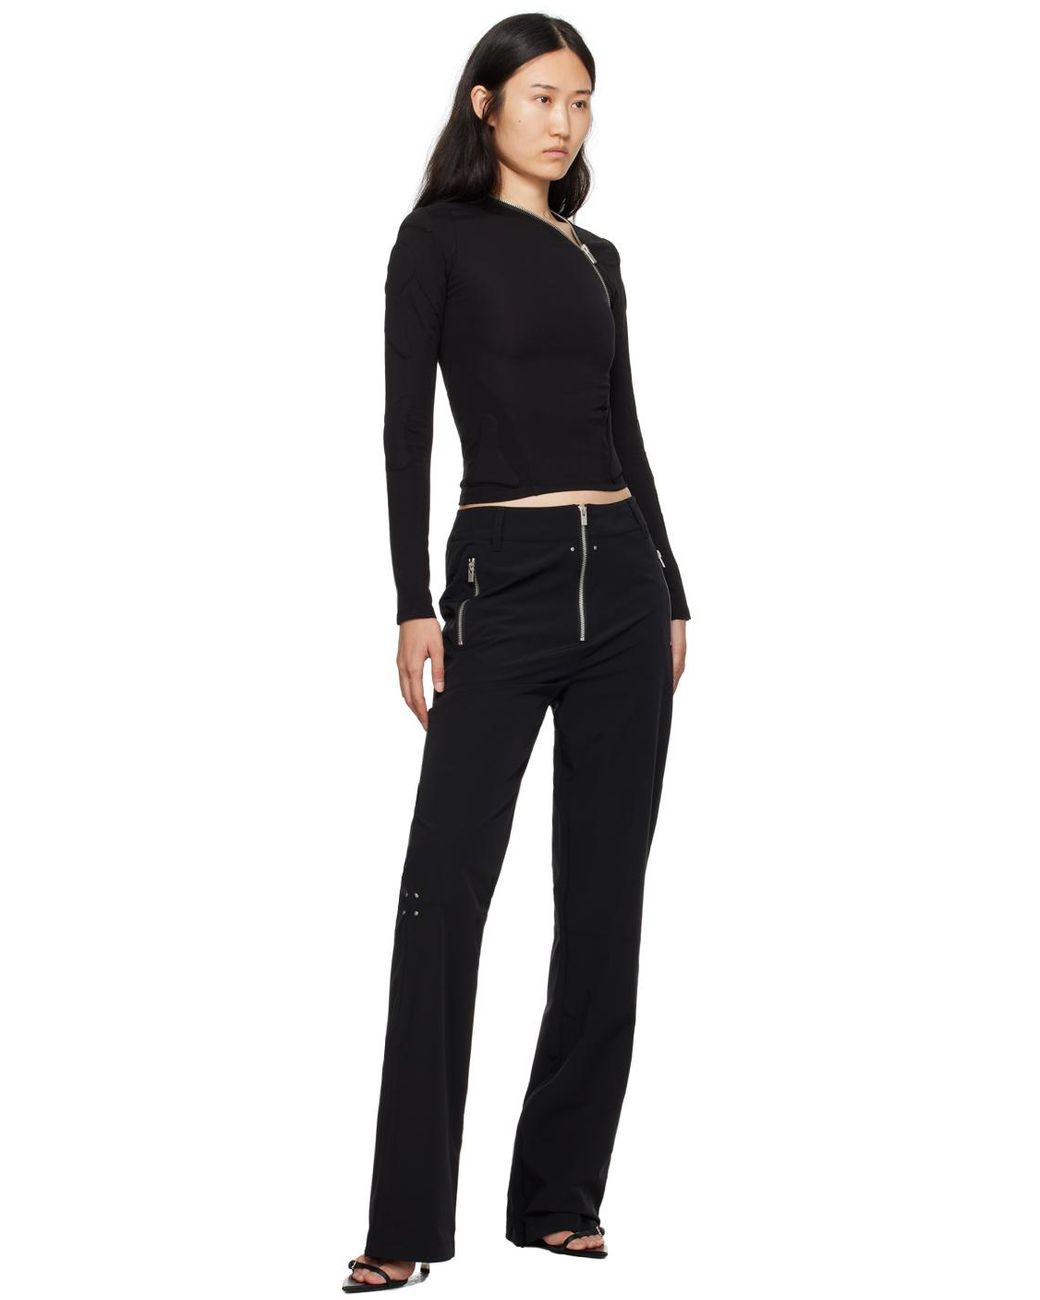 HELIOT EMIL Affinity Technical Trousers in Black